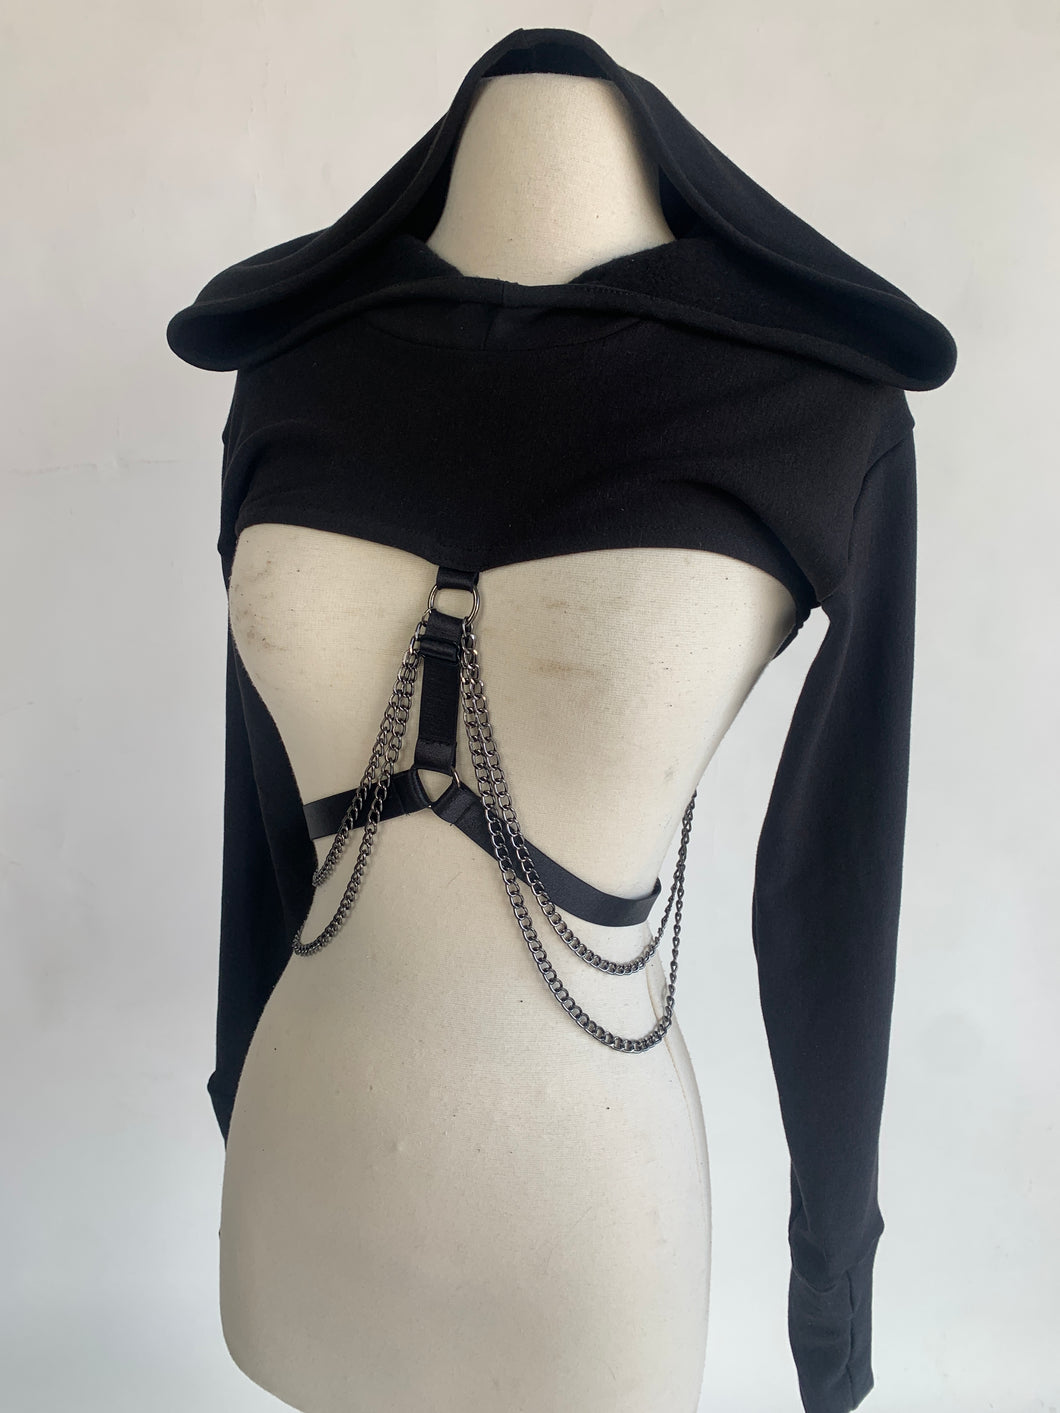 Andromeda Hoodie with removable chains - Black Bamboo Fleece